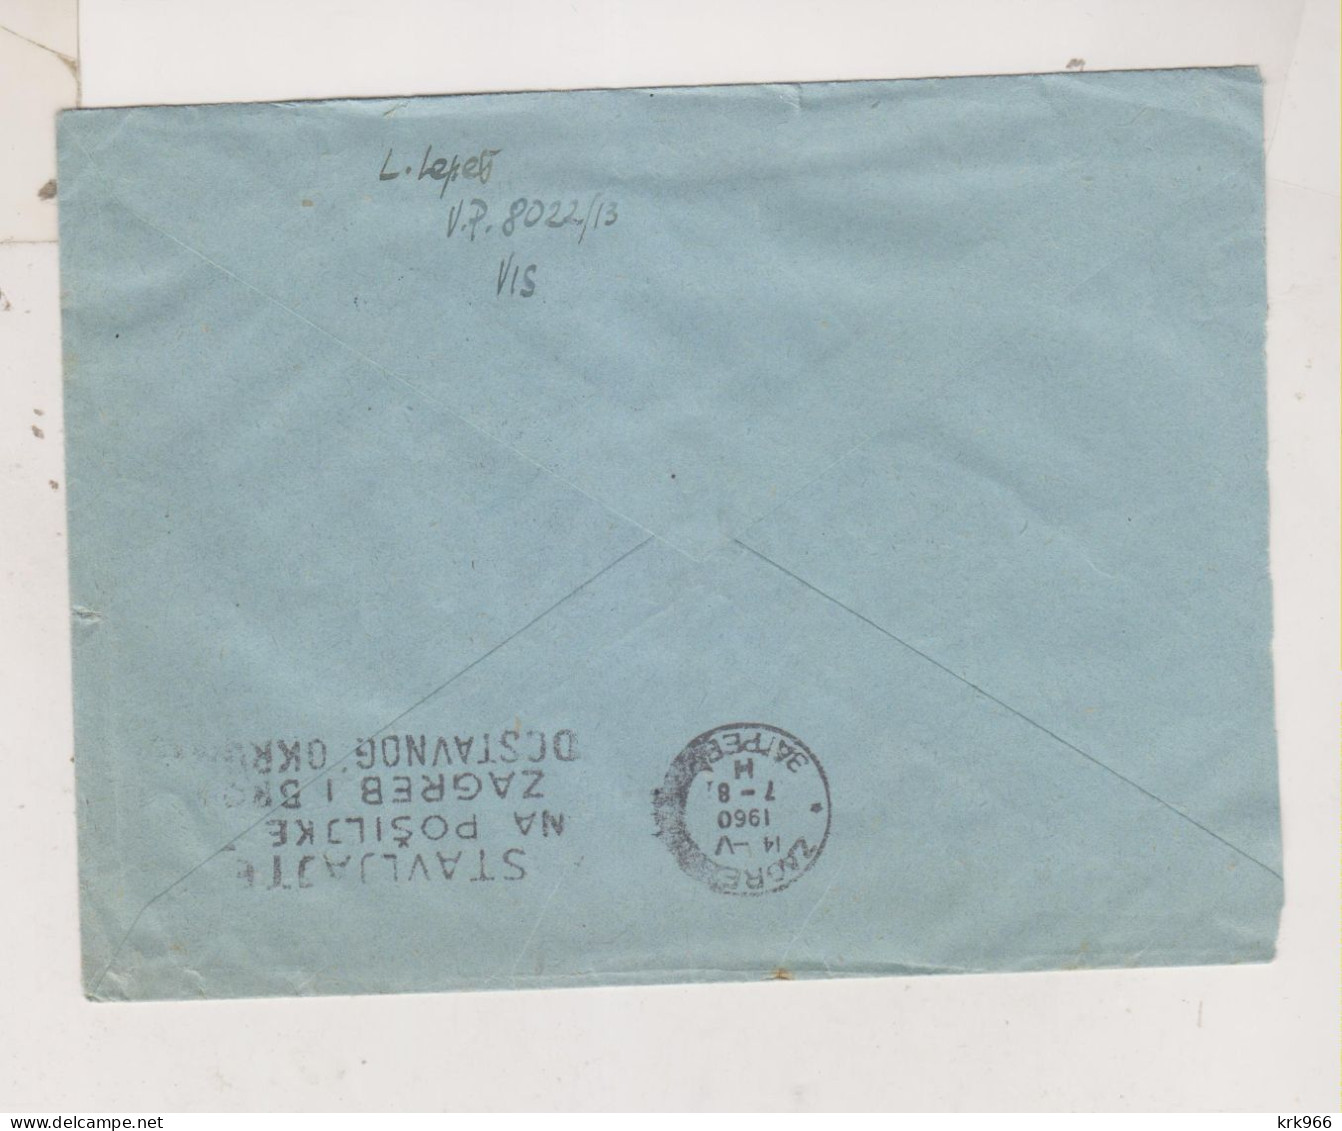 YUGOSLAVIA 1960 VIS    Nice  Cover To ZAGREB , Postage Due Charity Stamp - Covers & Documents